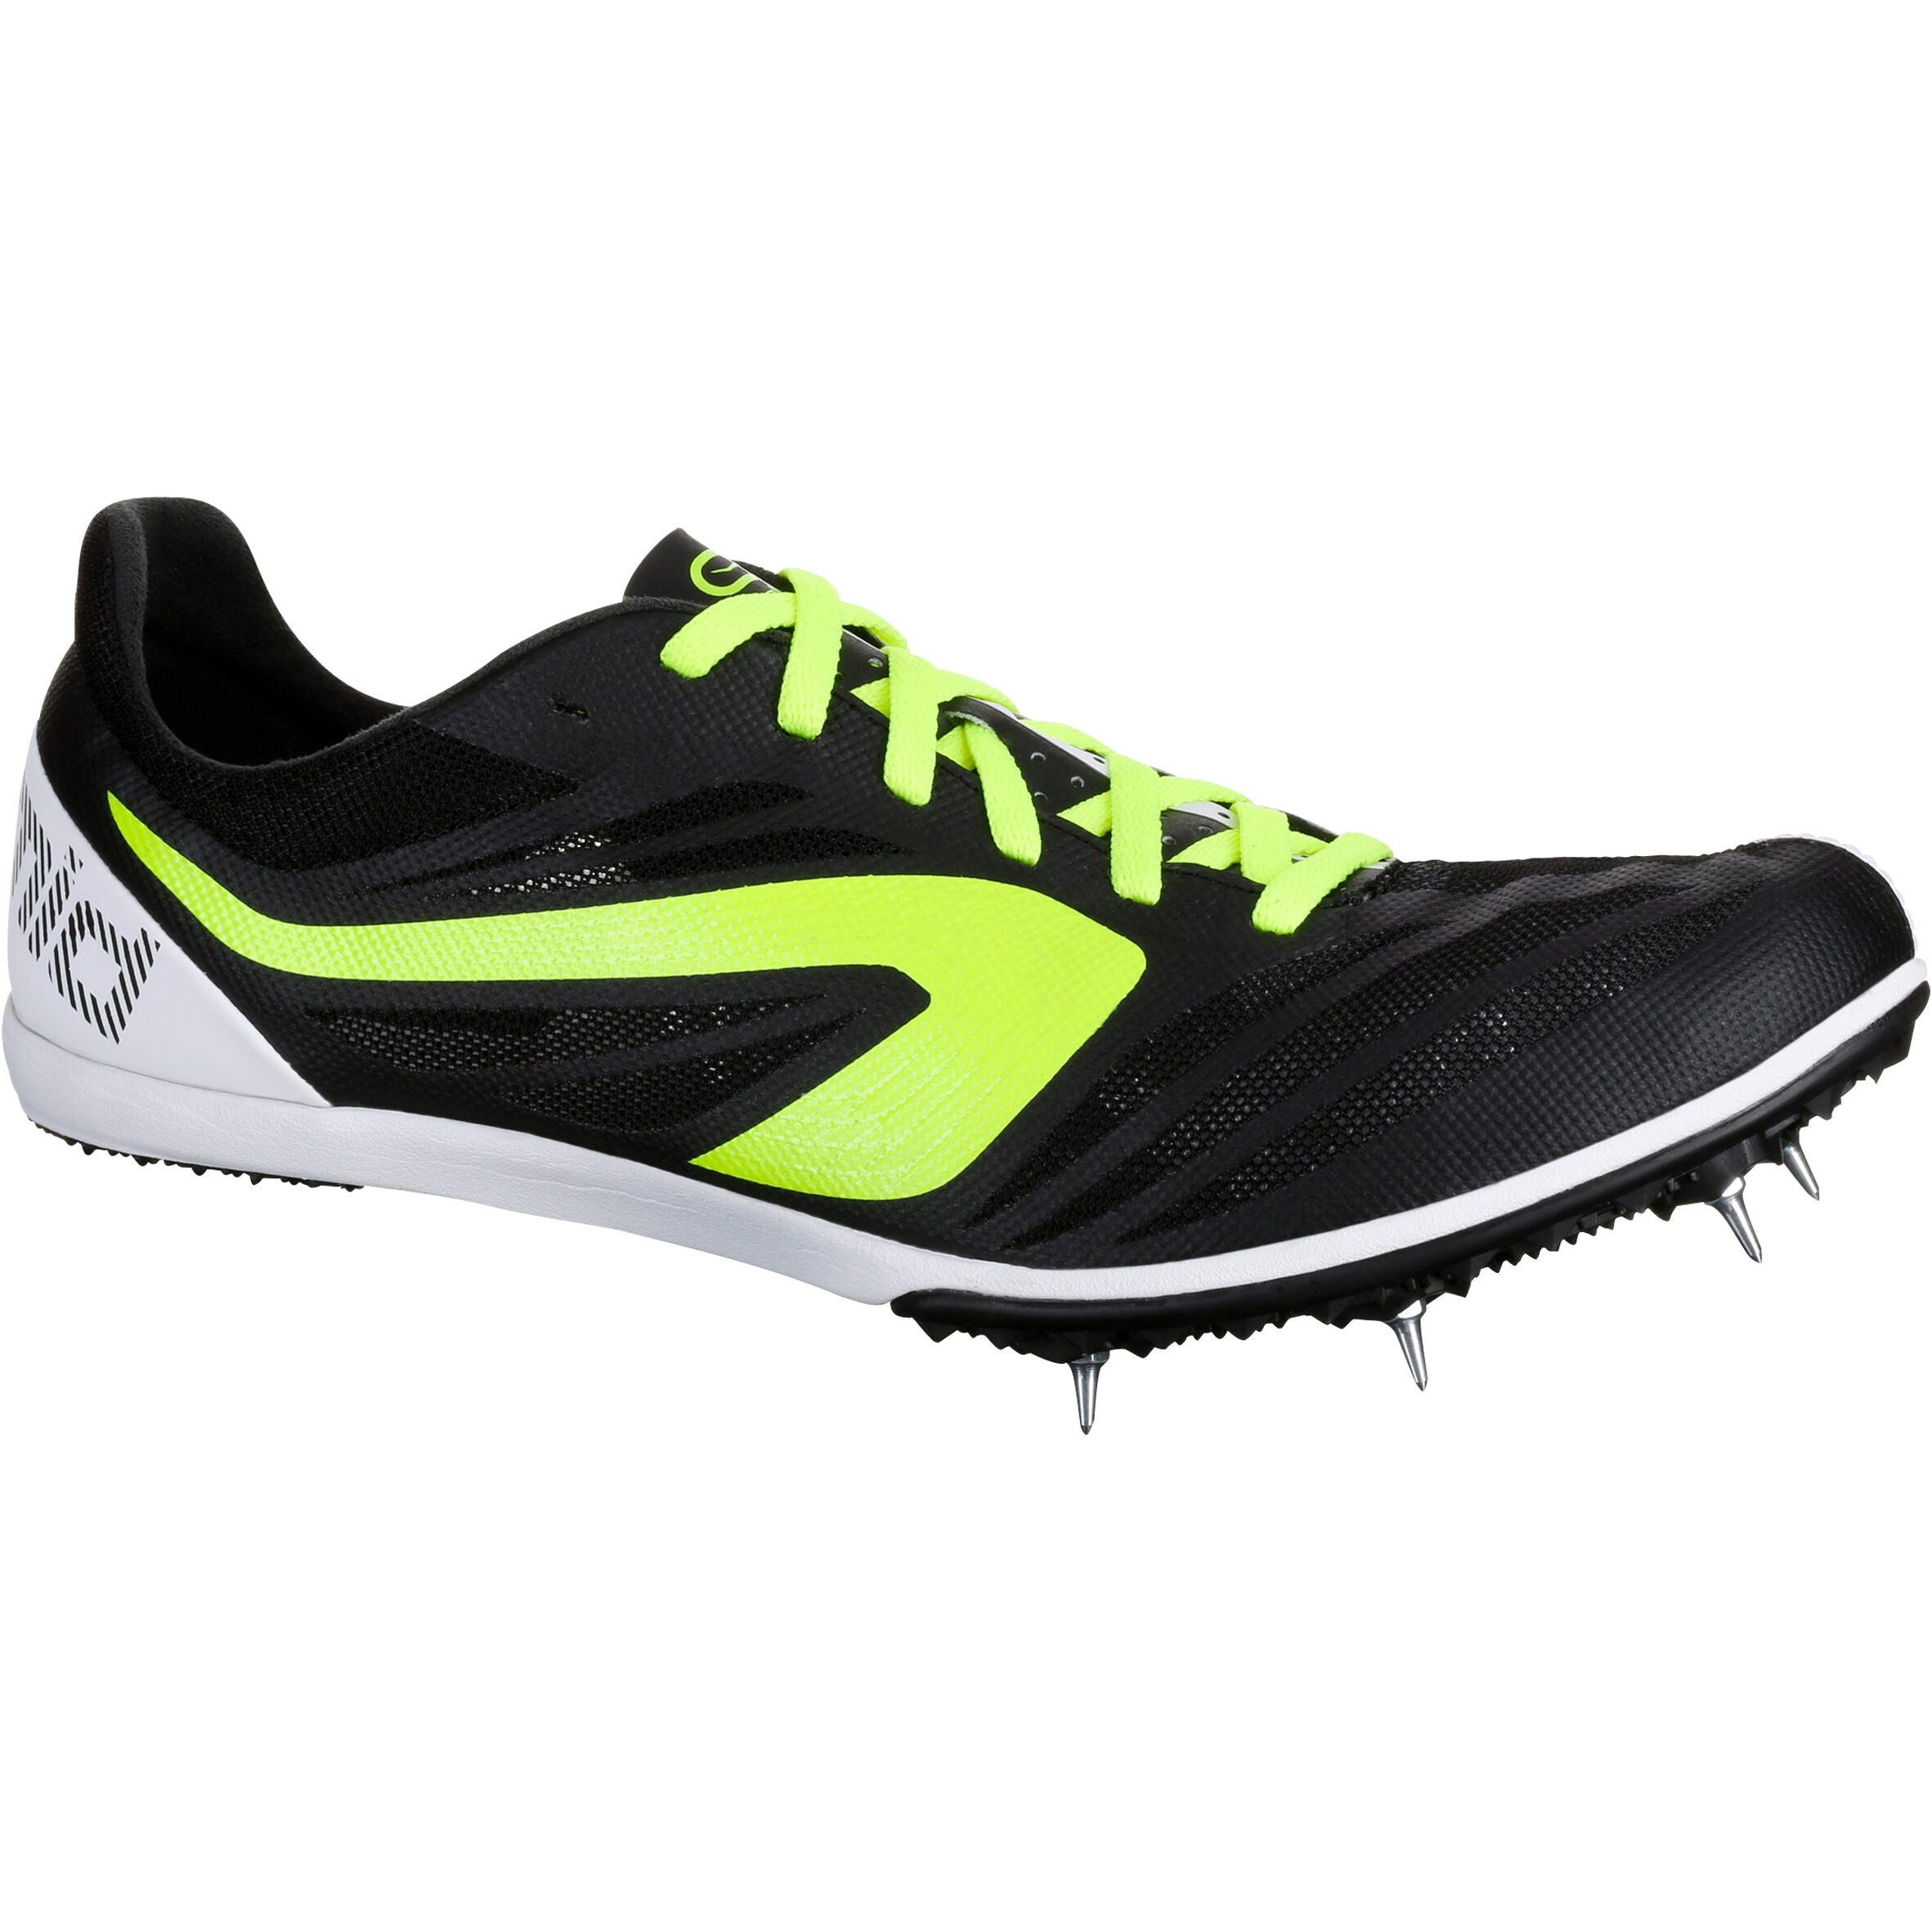 KIPRUN MIDDLE-DISTANCE RUNNING TRAINERS WITH SPIKES BLACK YELLOW WHITE